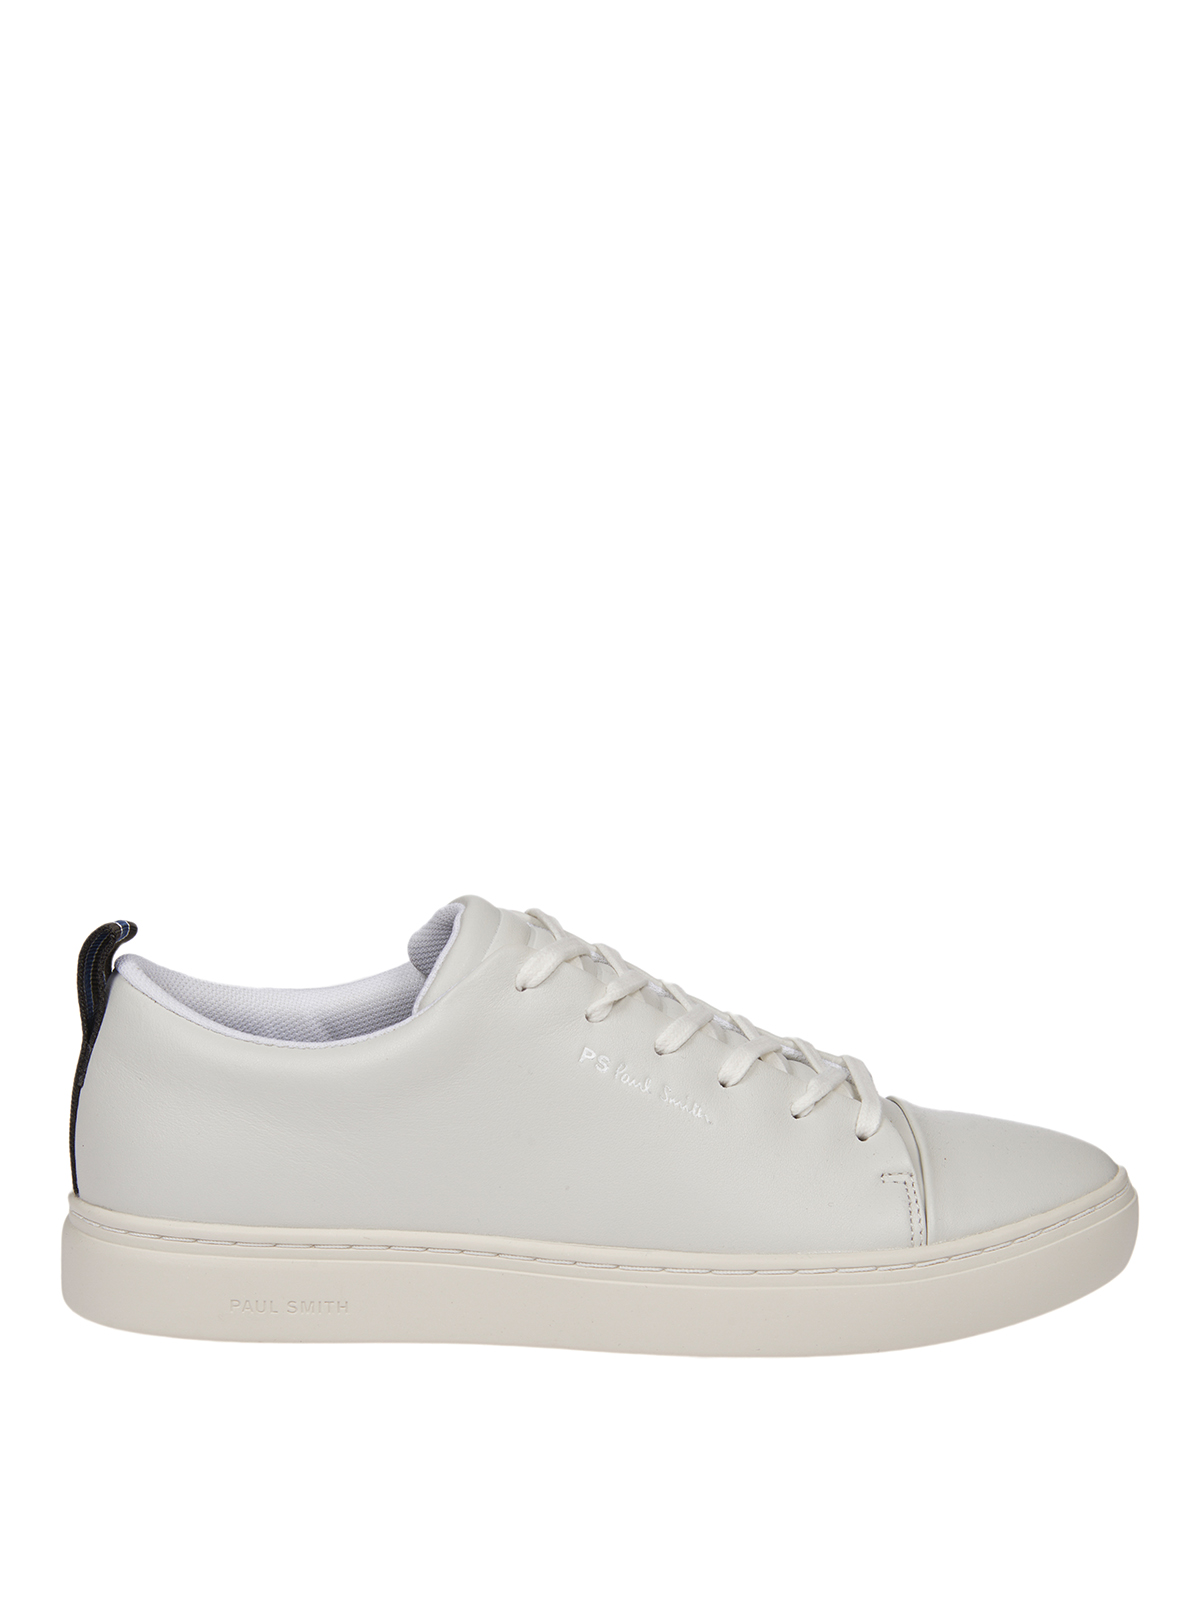 Trainers Paul Smith - Lee sneakers - M2SLEE01ACLE01 | Shop online at iKRIX